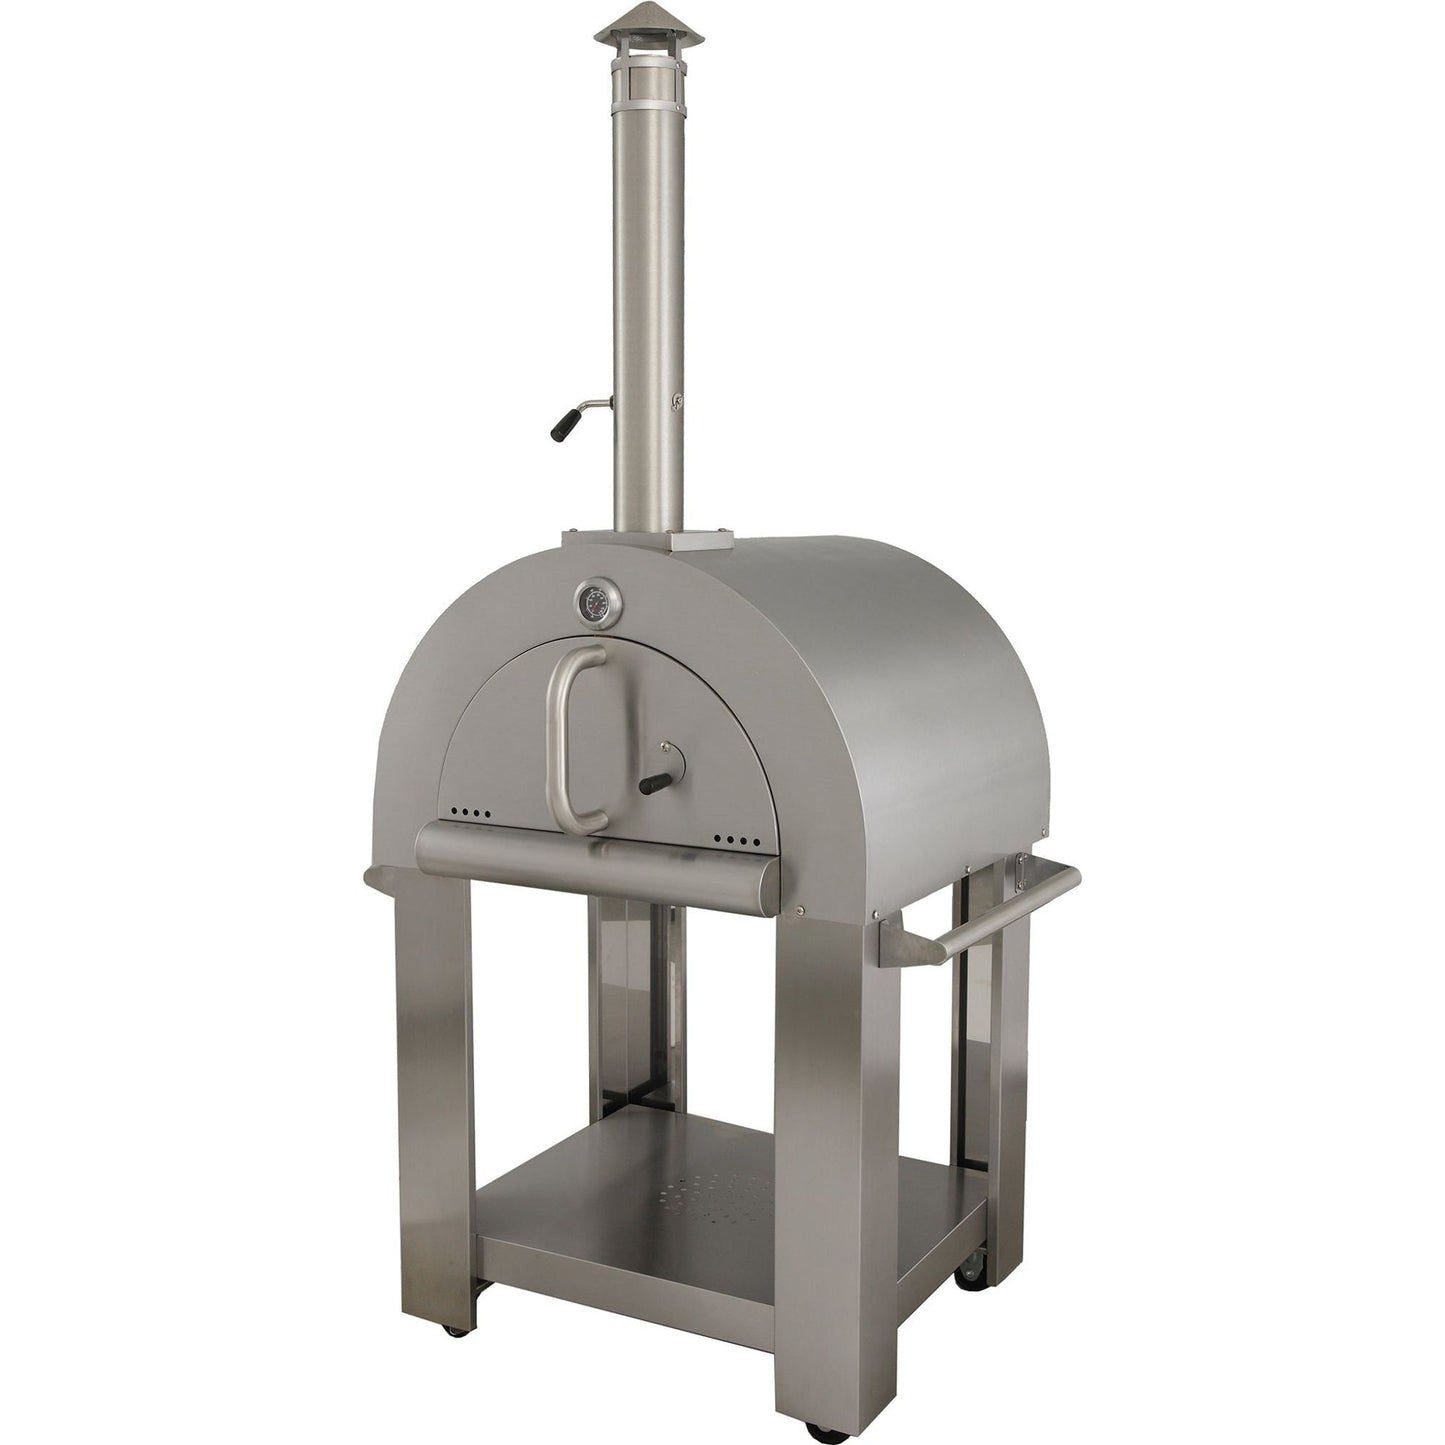 Pizza Makers & Ovens - Kucht Model K186PO Professional Stainless Steel Wood Fired Pizza Oven